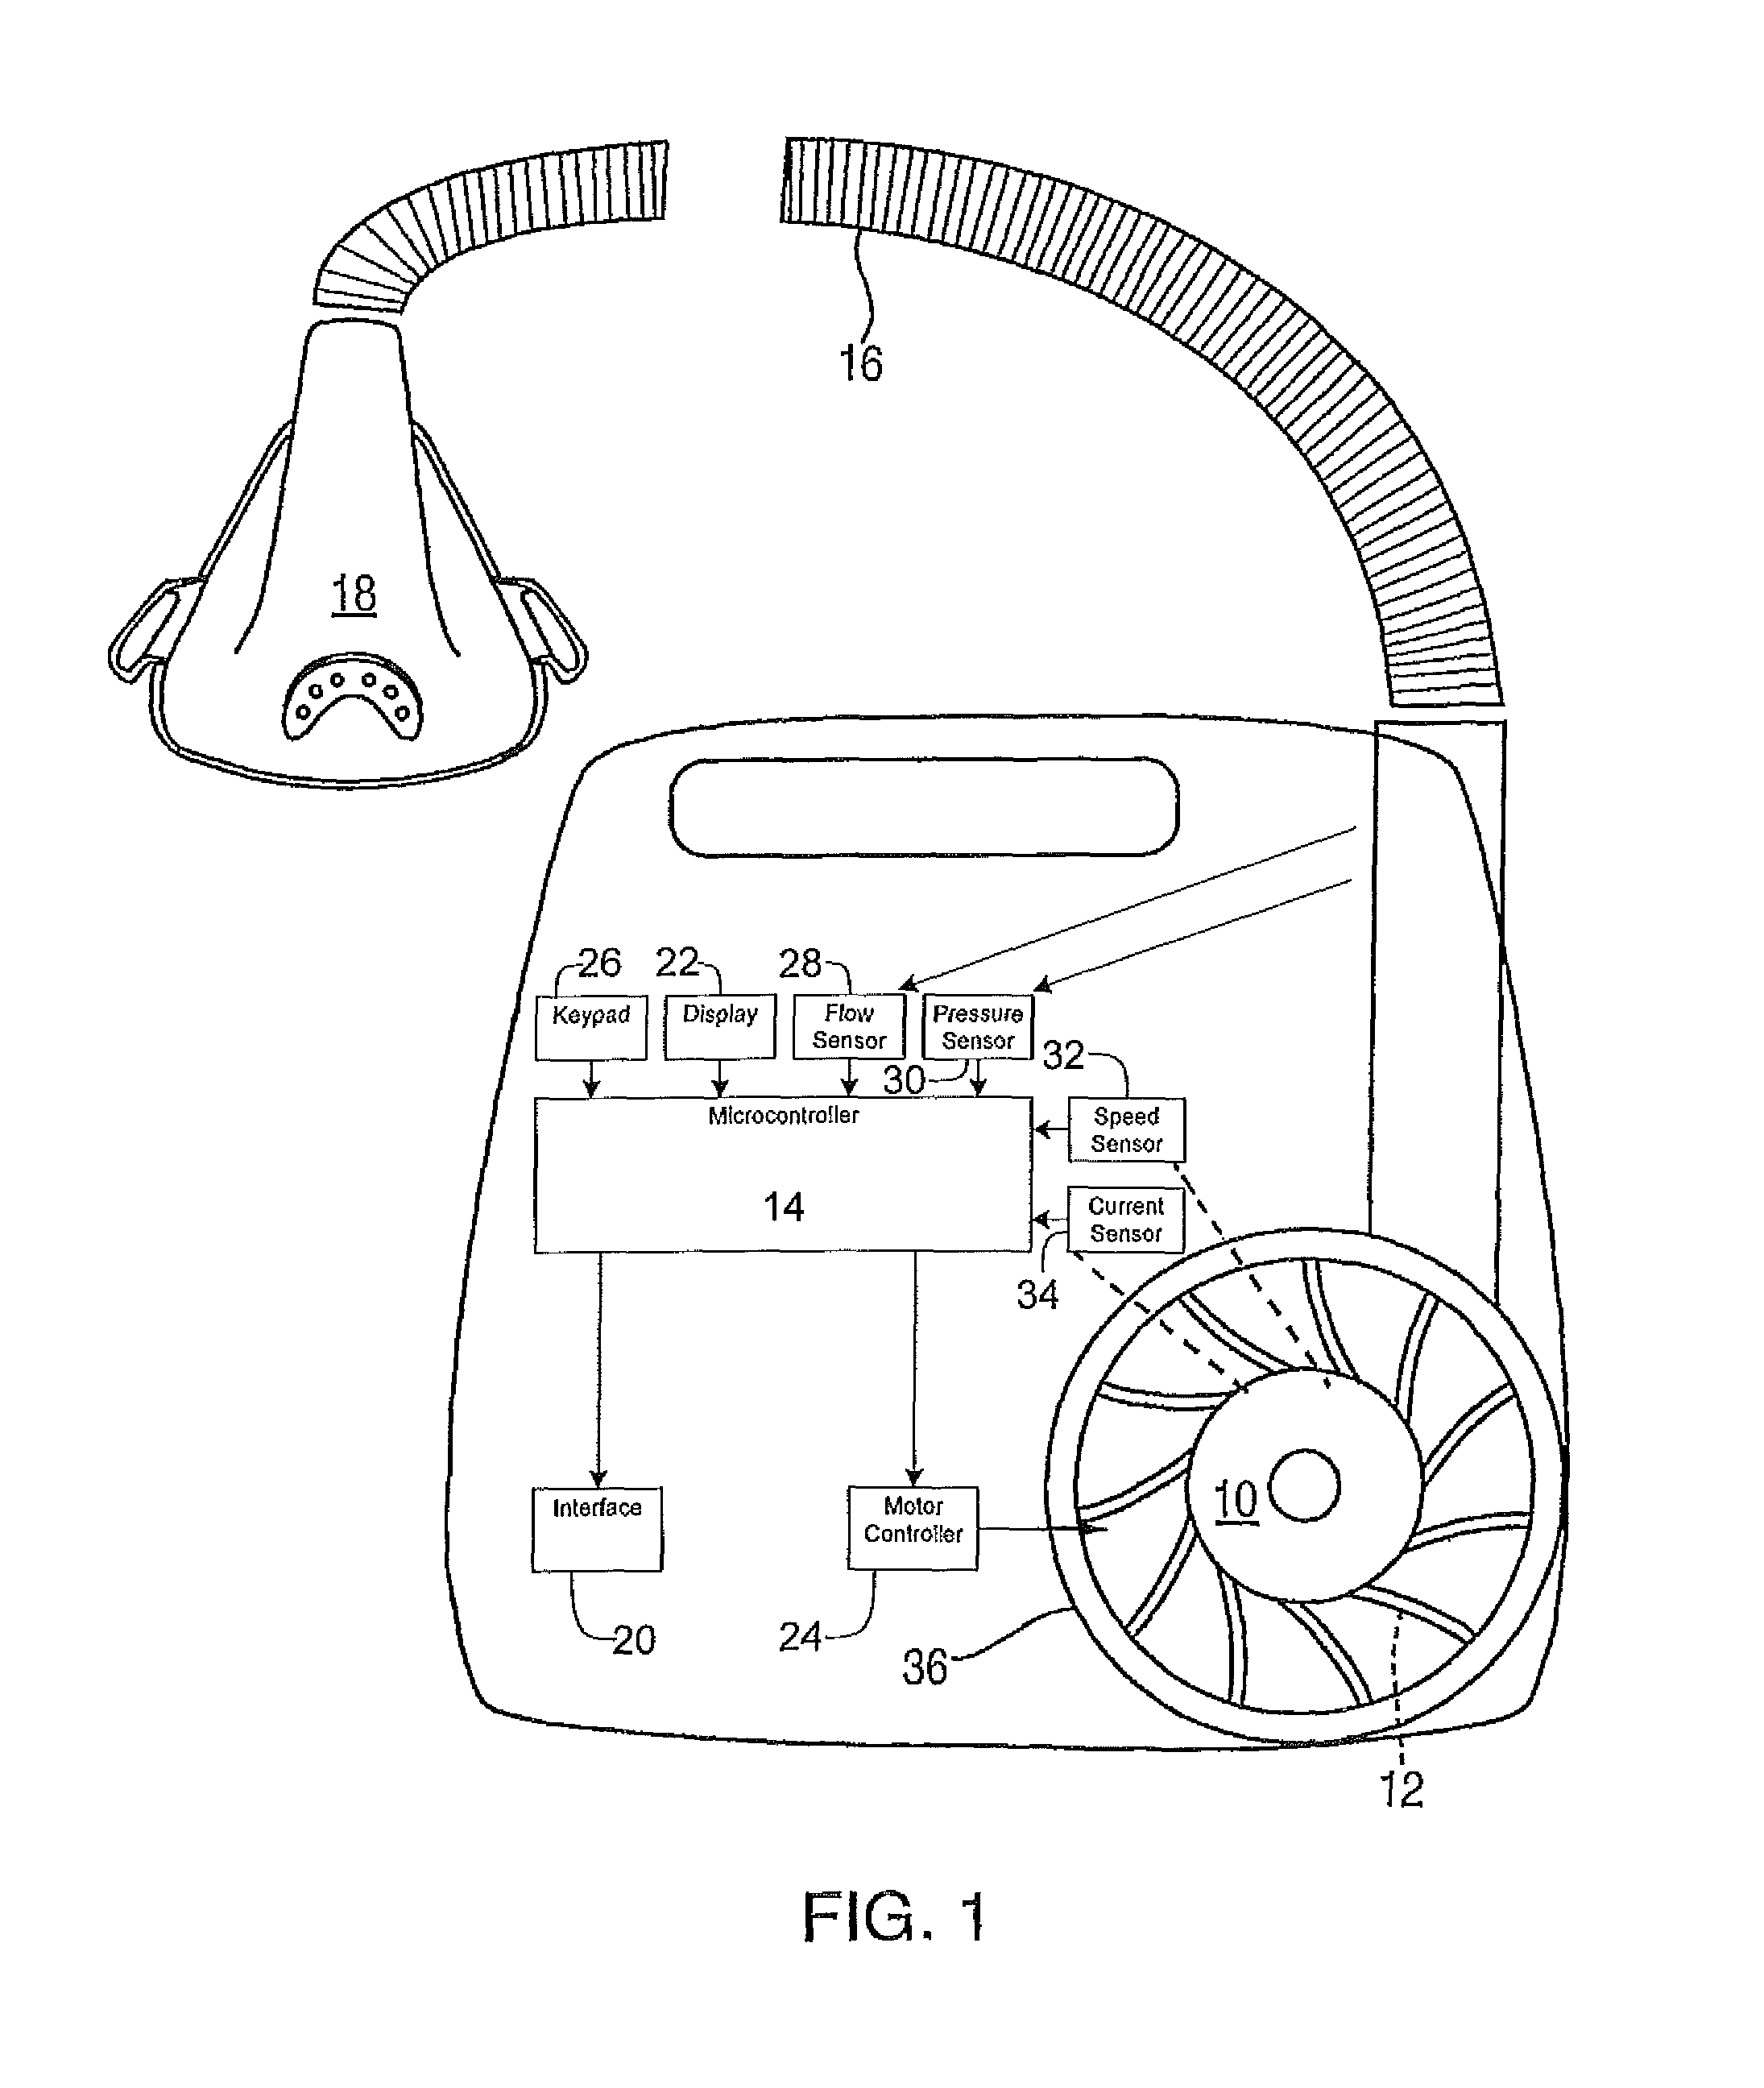 Method and apparatus for improving flow and pressure estimation in CPAP systems